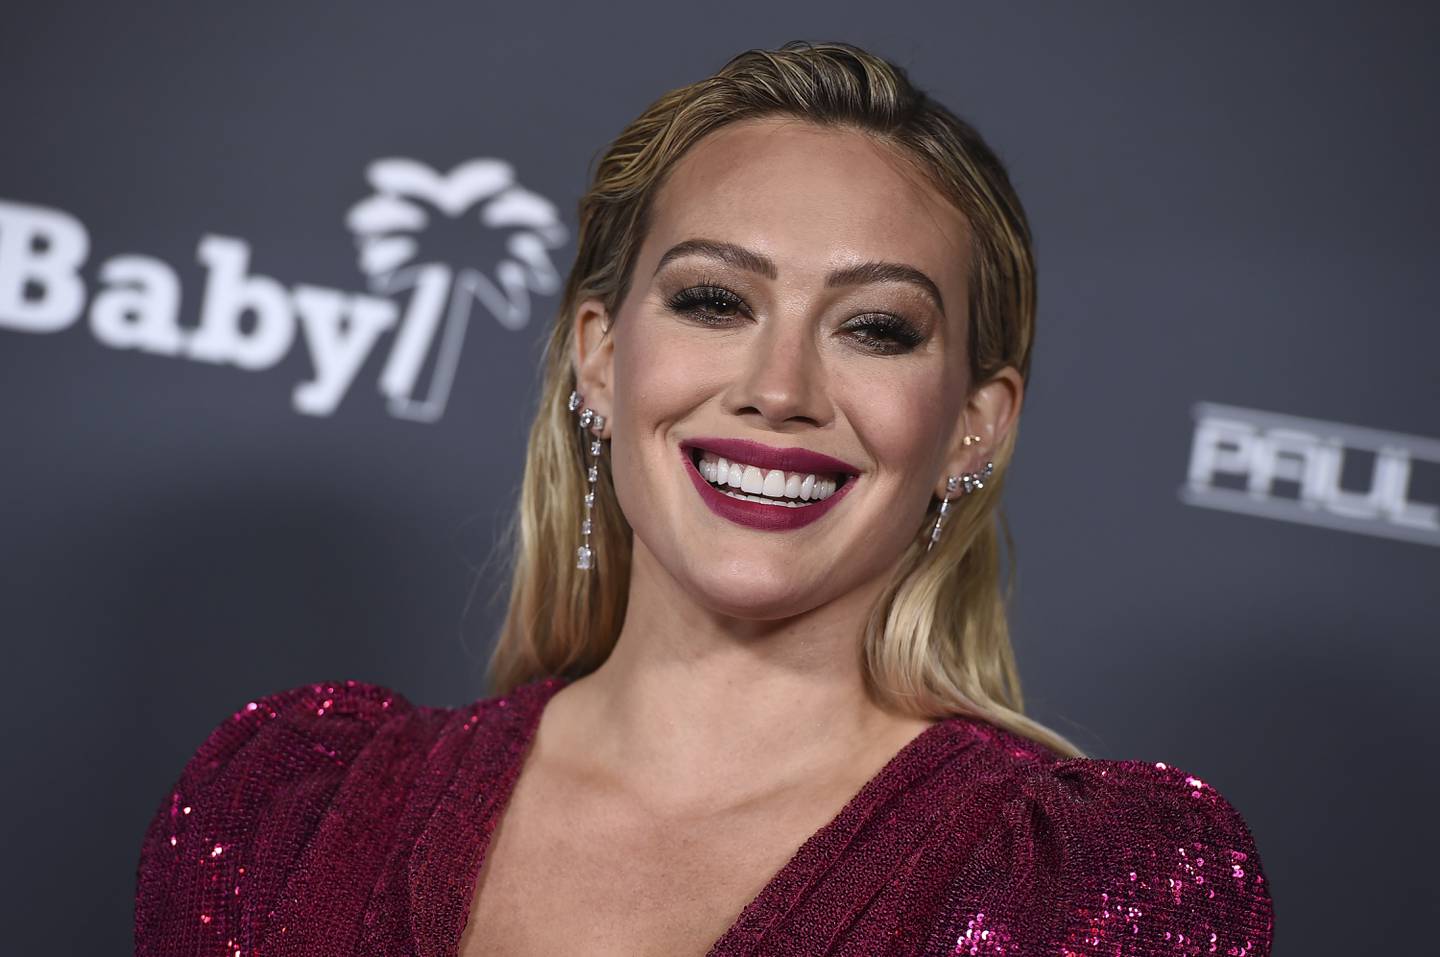 Hilary Duff has fully recovered from Covid-19, saying she's 'happy to be vaxxed'. Invision / AP